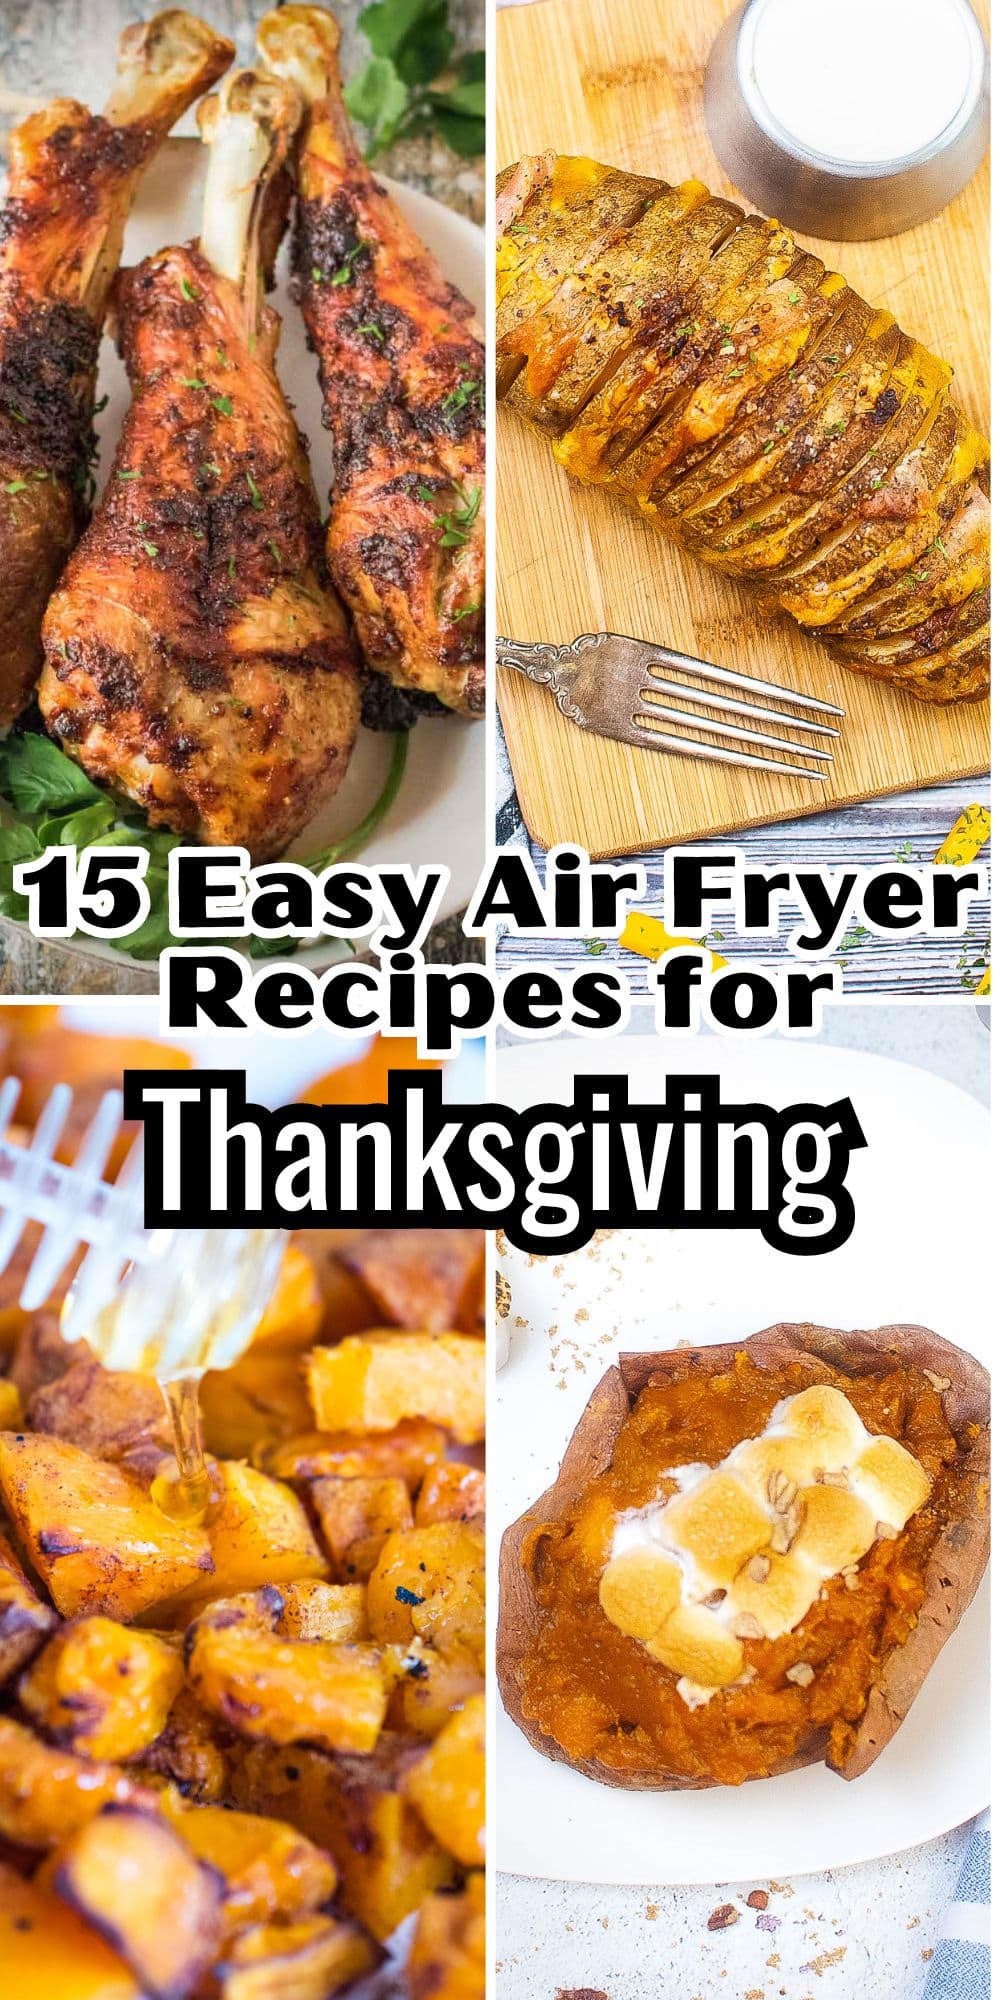 15 easy air fryer recipes for thanksgiving.